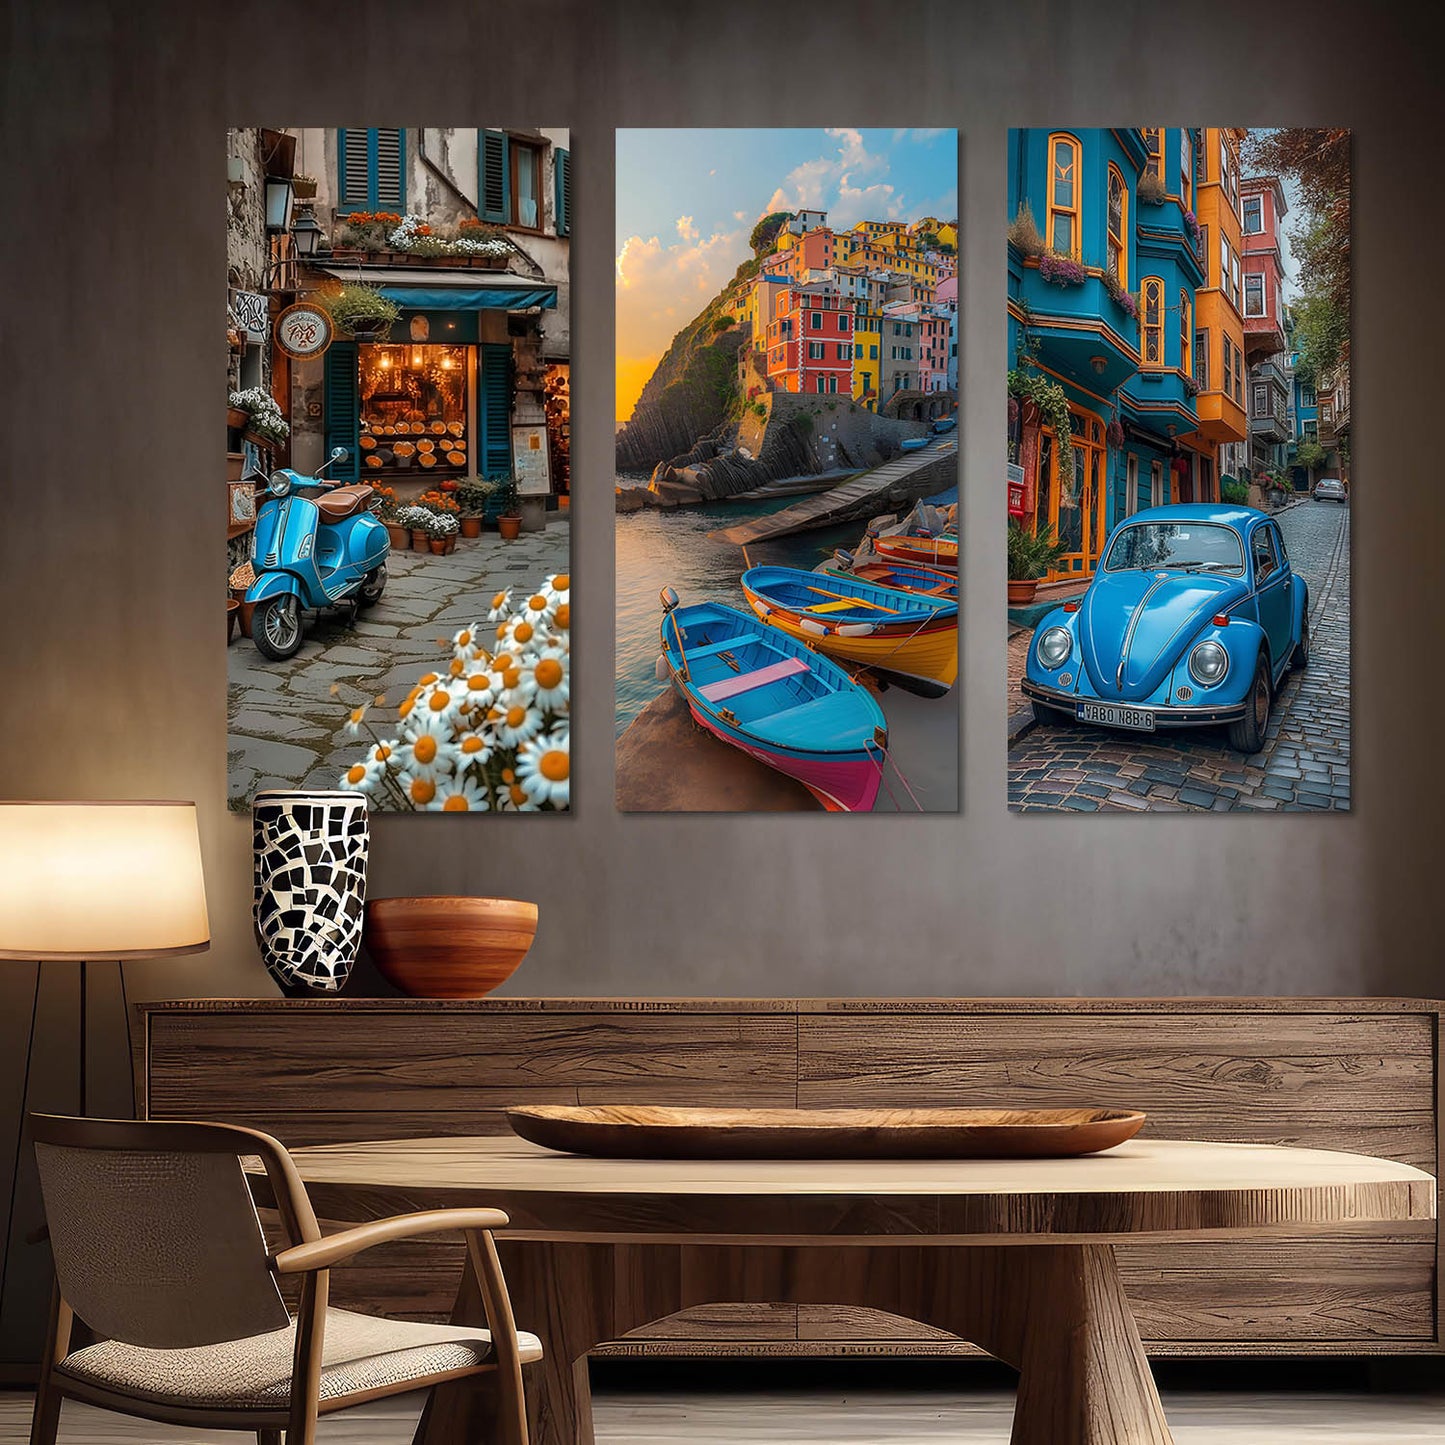 City view Wall Art Canvas For Home Decor Office Living Room